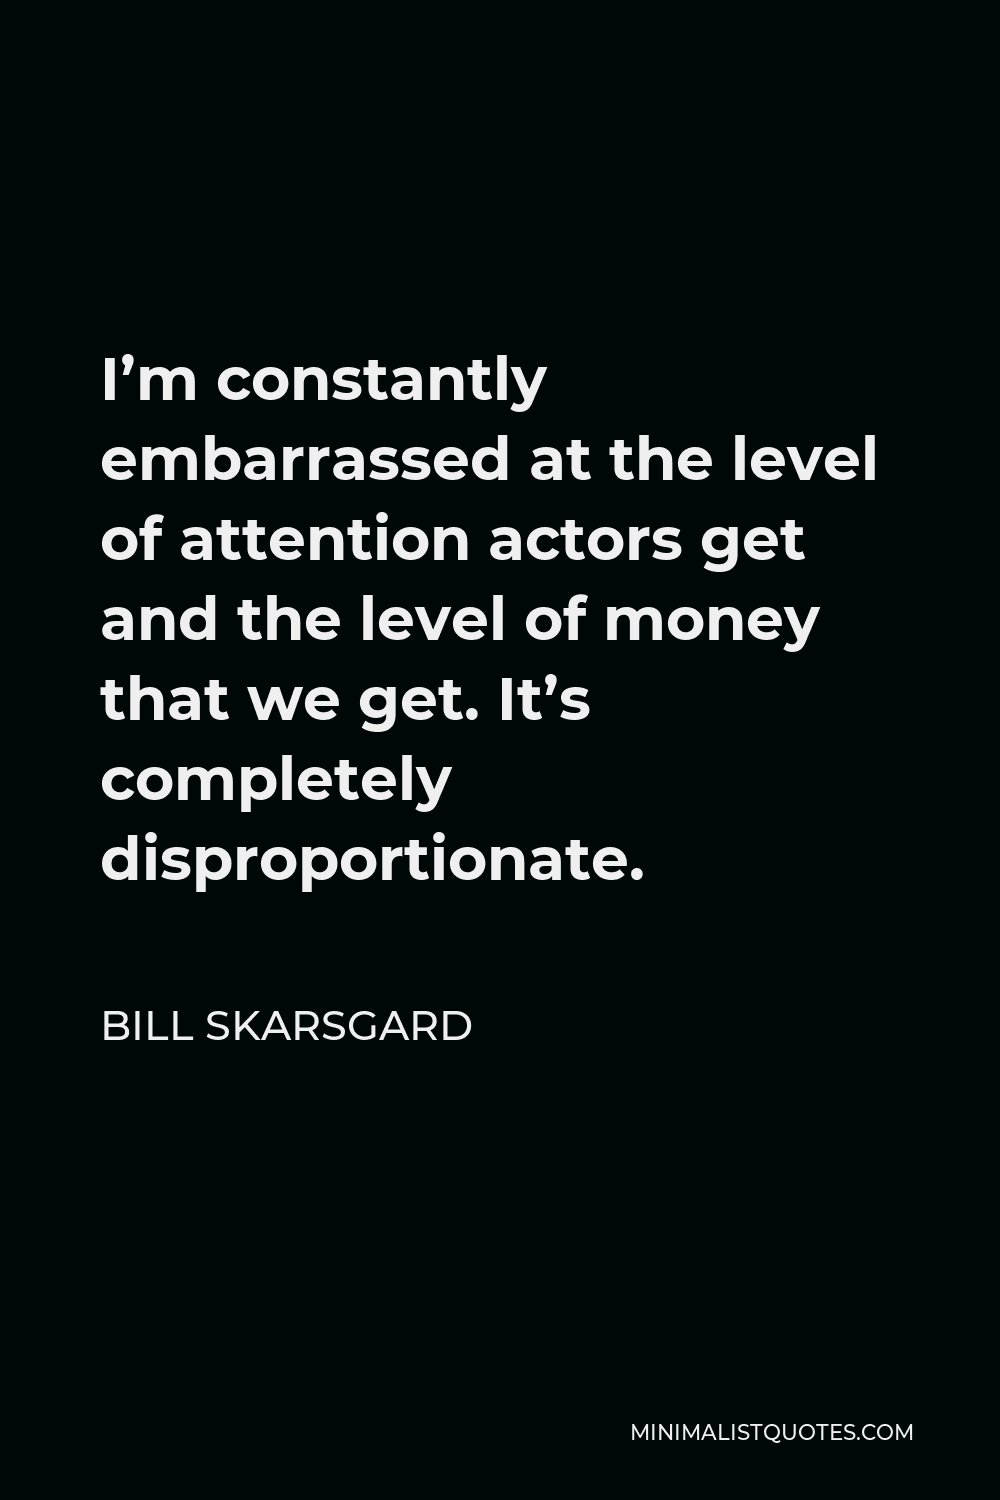 Bill Skarsgard Quote - I’m constantly embarrassed at the level of attention actors get and the level of money that we get. It’s completely disproportionate.